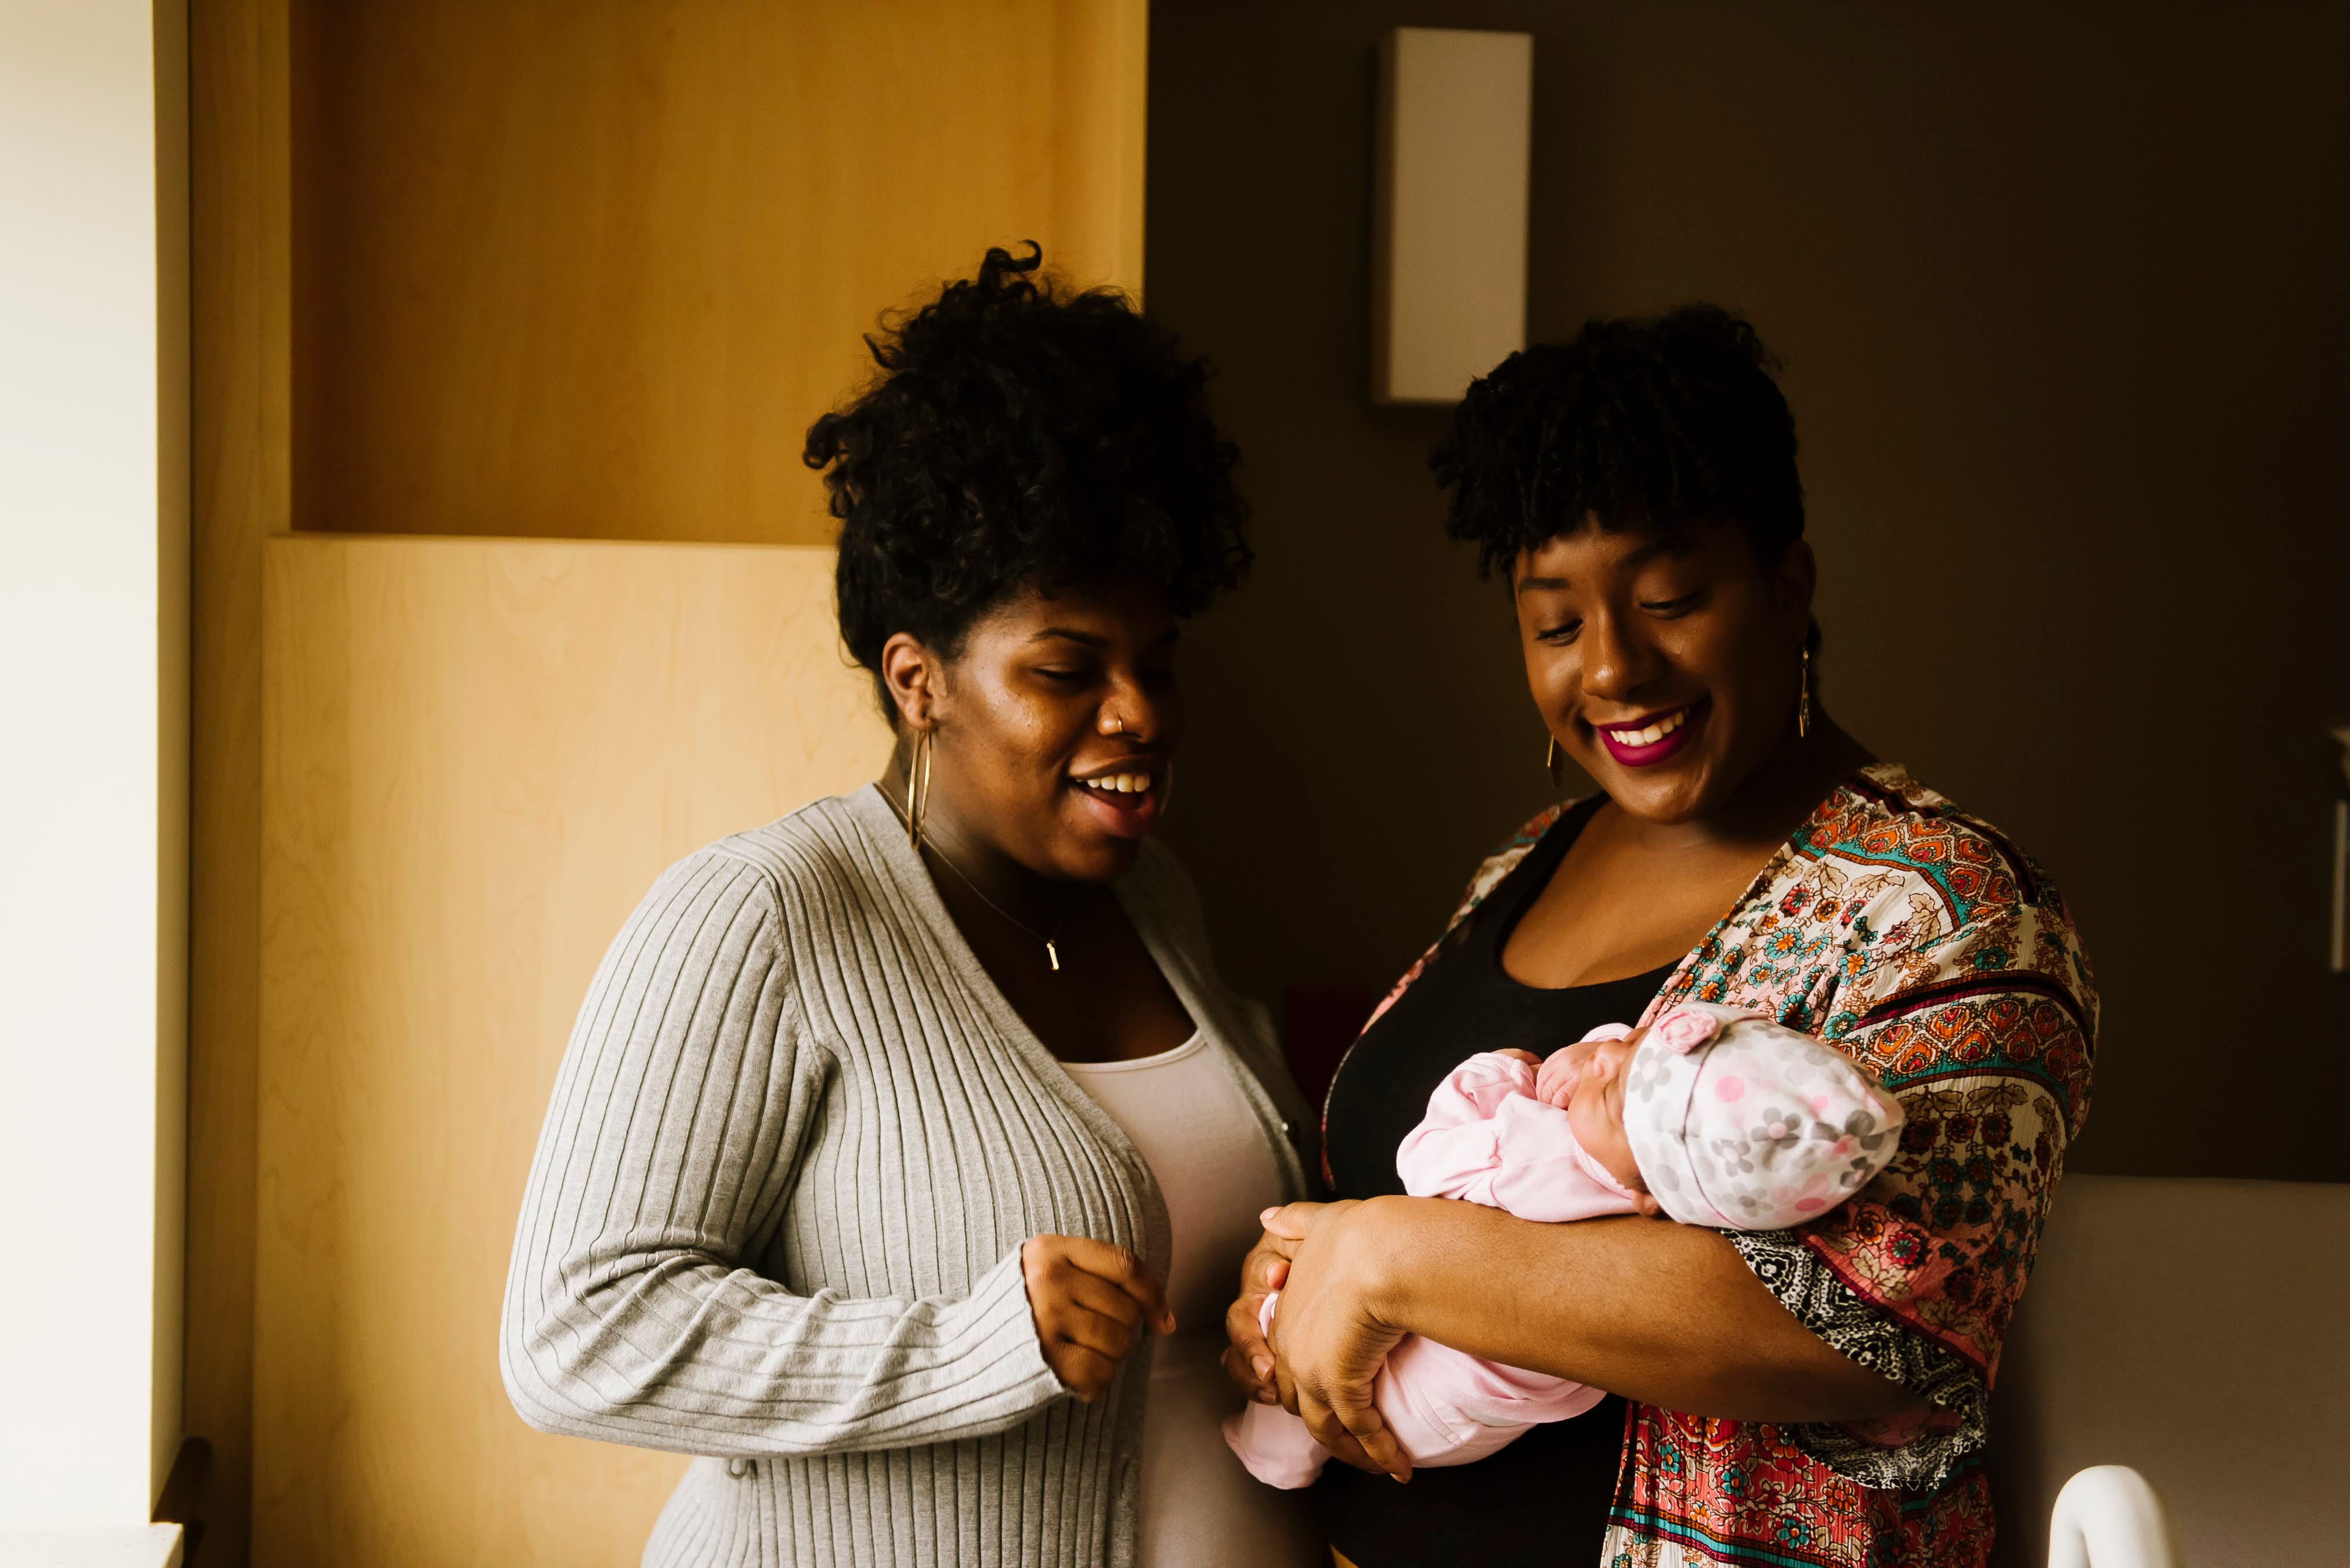 Sequoia Kemp, a certified doula, stands next to her sister and client while holding her new niece in the hospital.